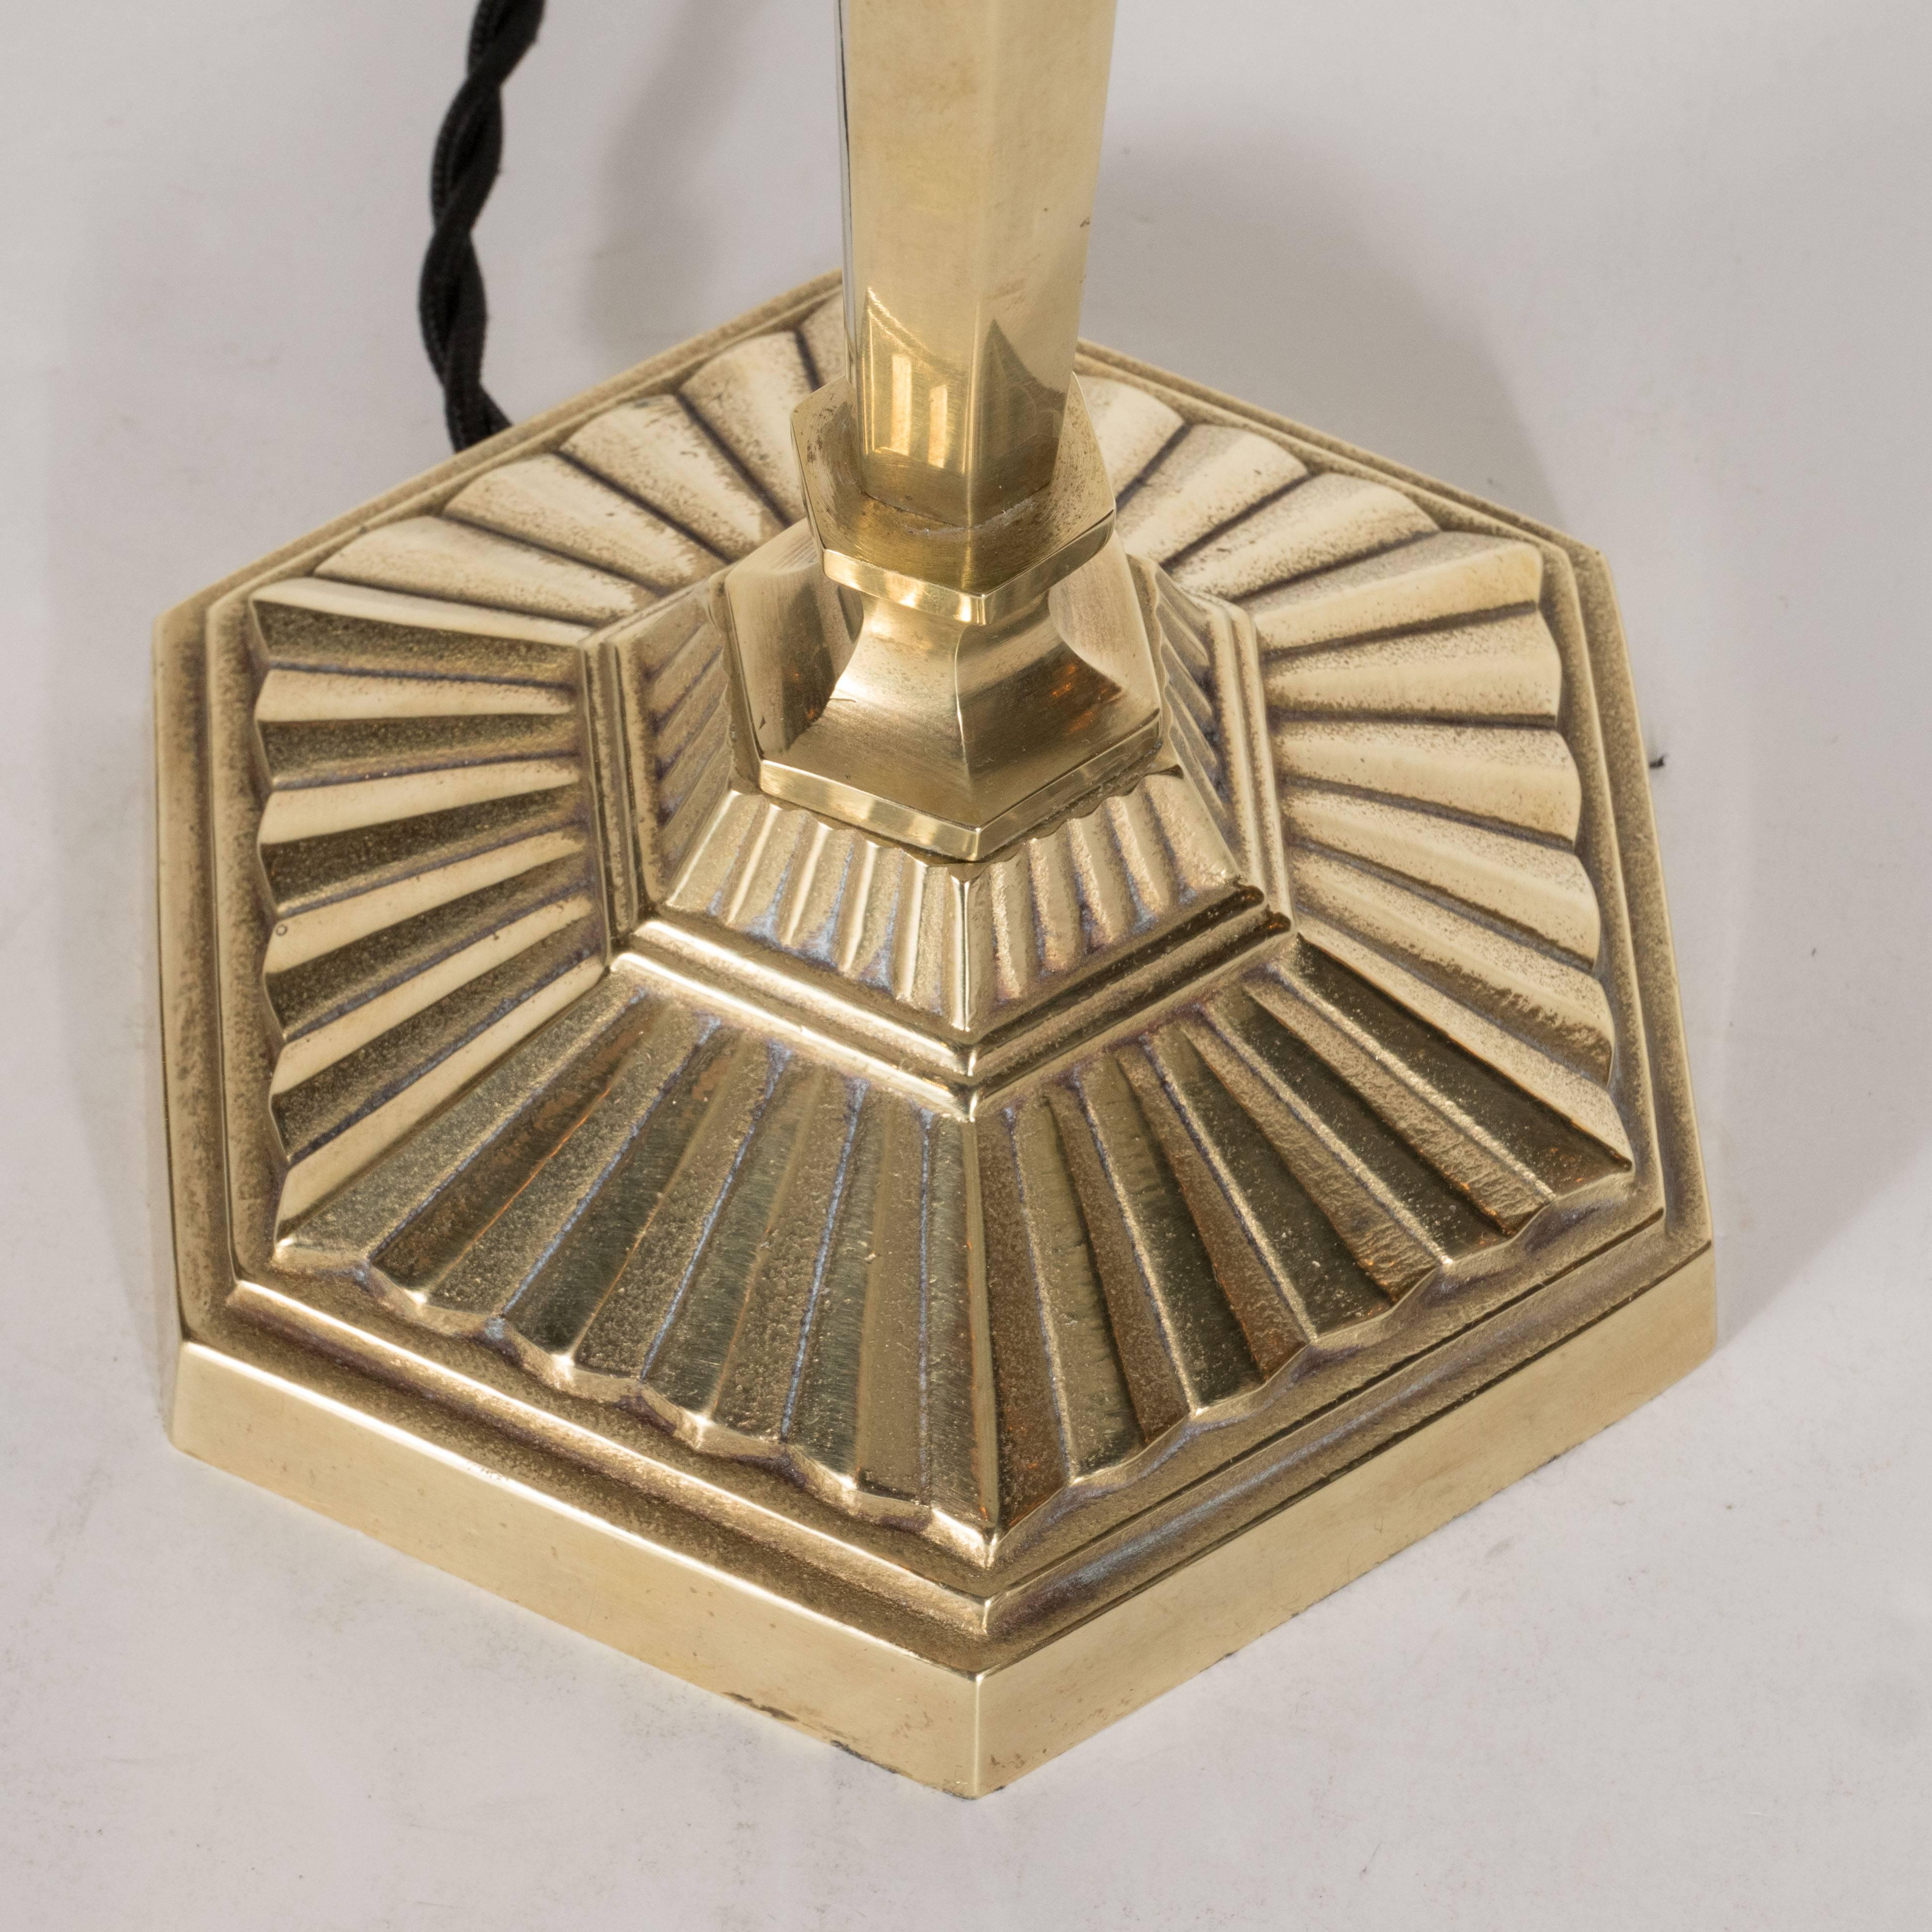 Exquisite Art Deco Lamp in Gilded Bronze & Frosted Glass with Geometric Designs 1